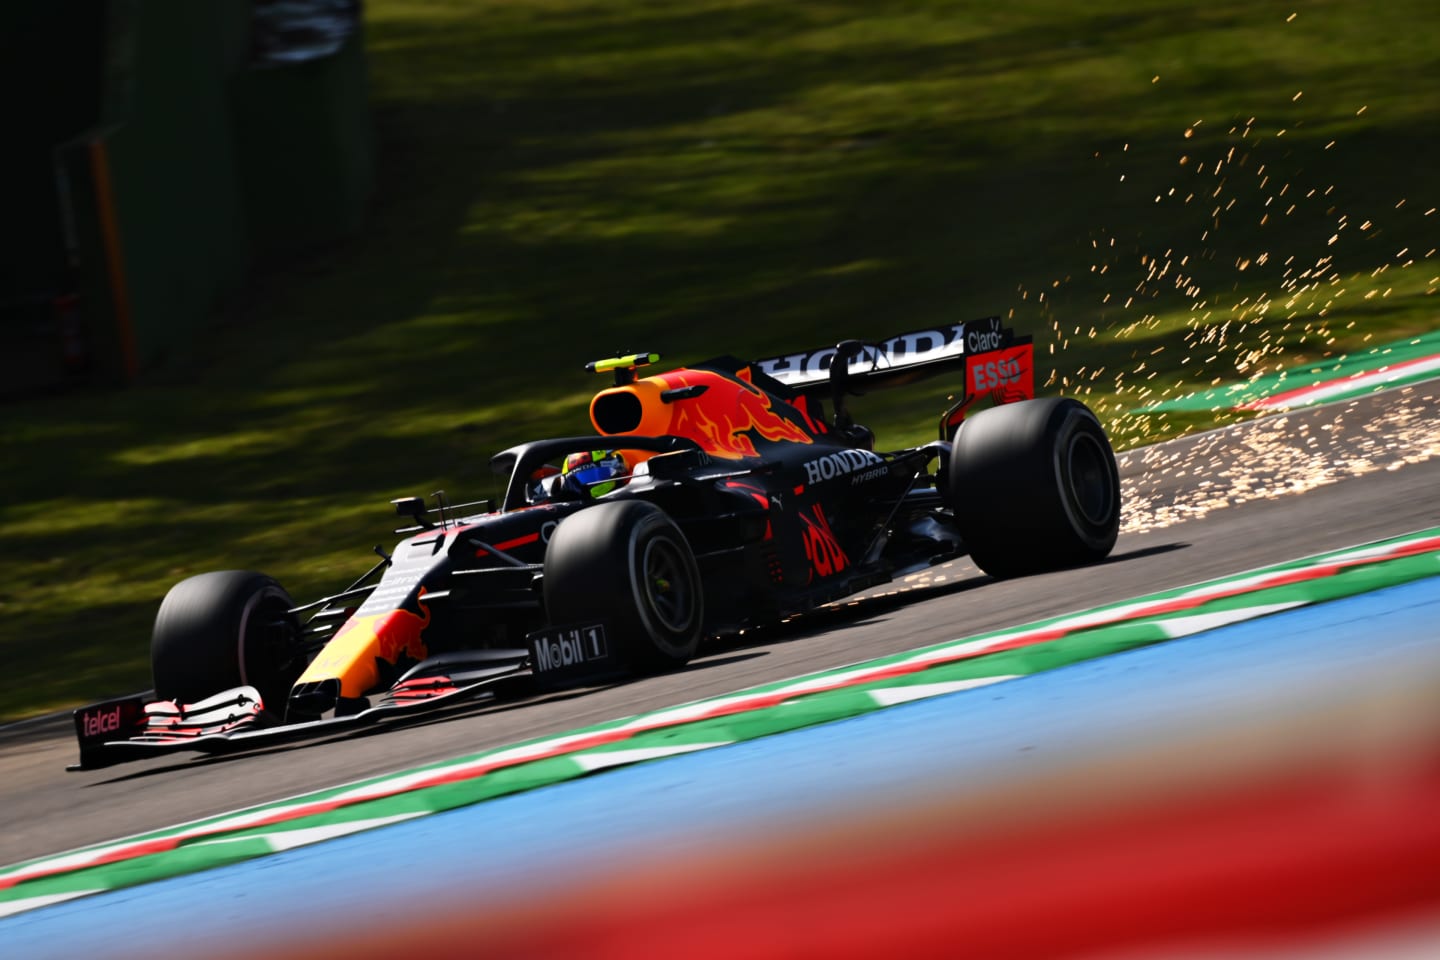 IMOLA, ITALY - APRIL 16: Sparks fly behind Sergio Perez of Mexico driving the (11) Red Bull Racing RB16B Honda during practice ahead of the F1 Grand Prix of Emilia Romagna at Autodromo Enzo e Dino Ferrari on April 16, 2021 in Imola, Italy. (Photo by Clive Mason - Formula 1/Formula 1 via Getty Images)